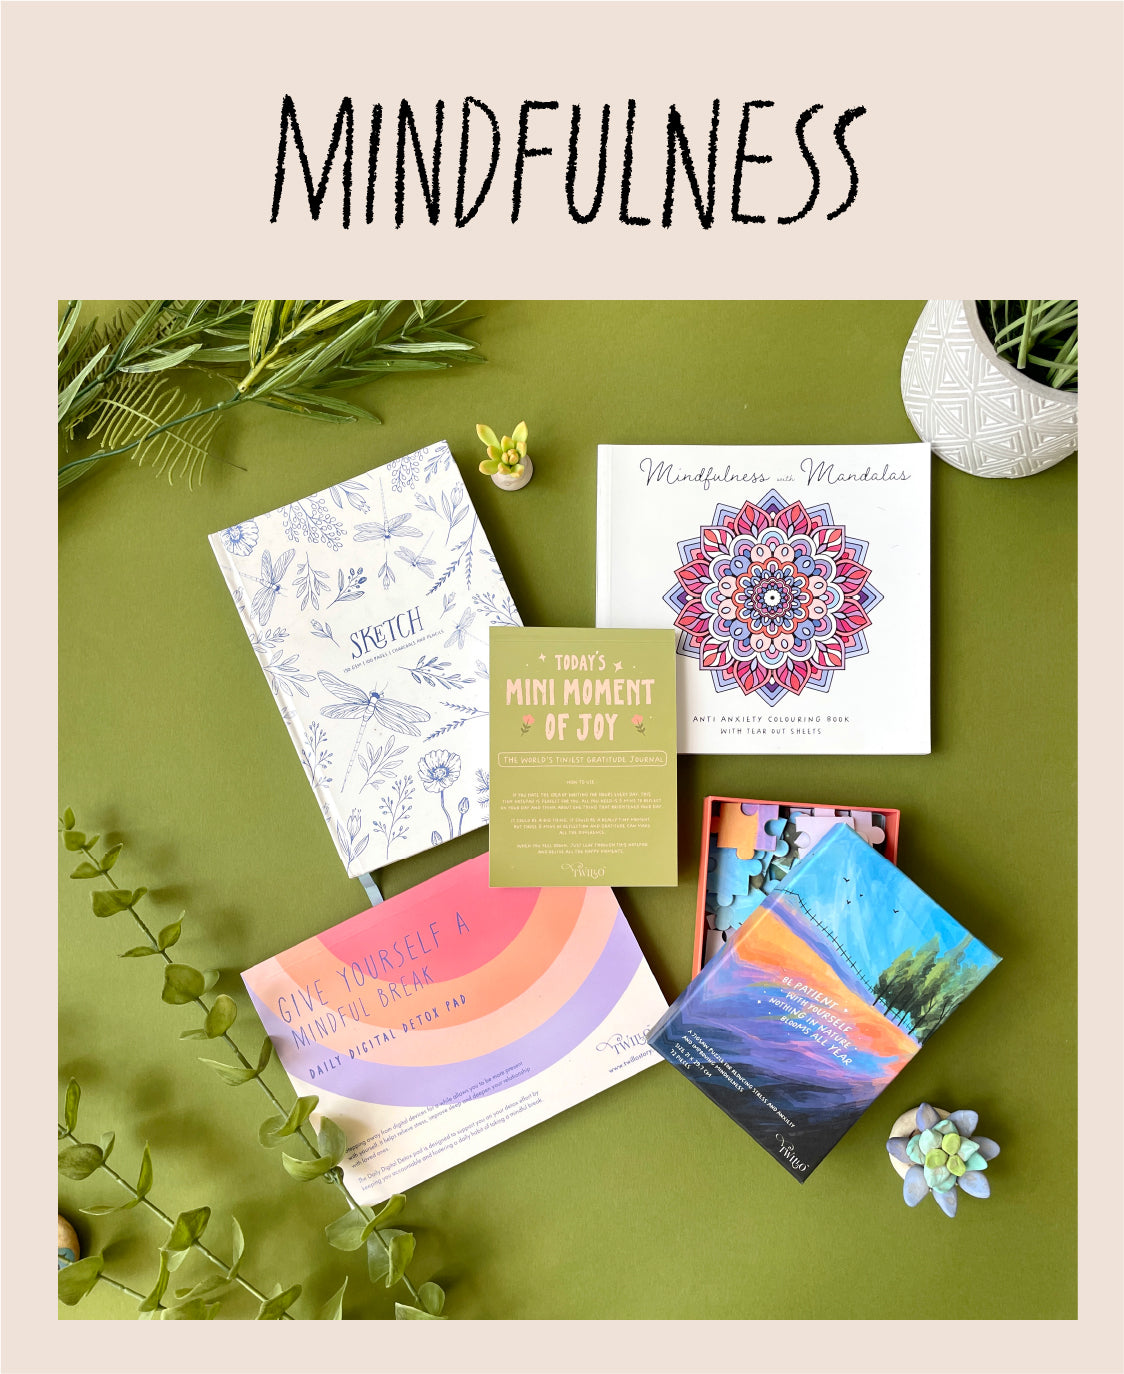 The Mindfulness Toolkit